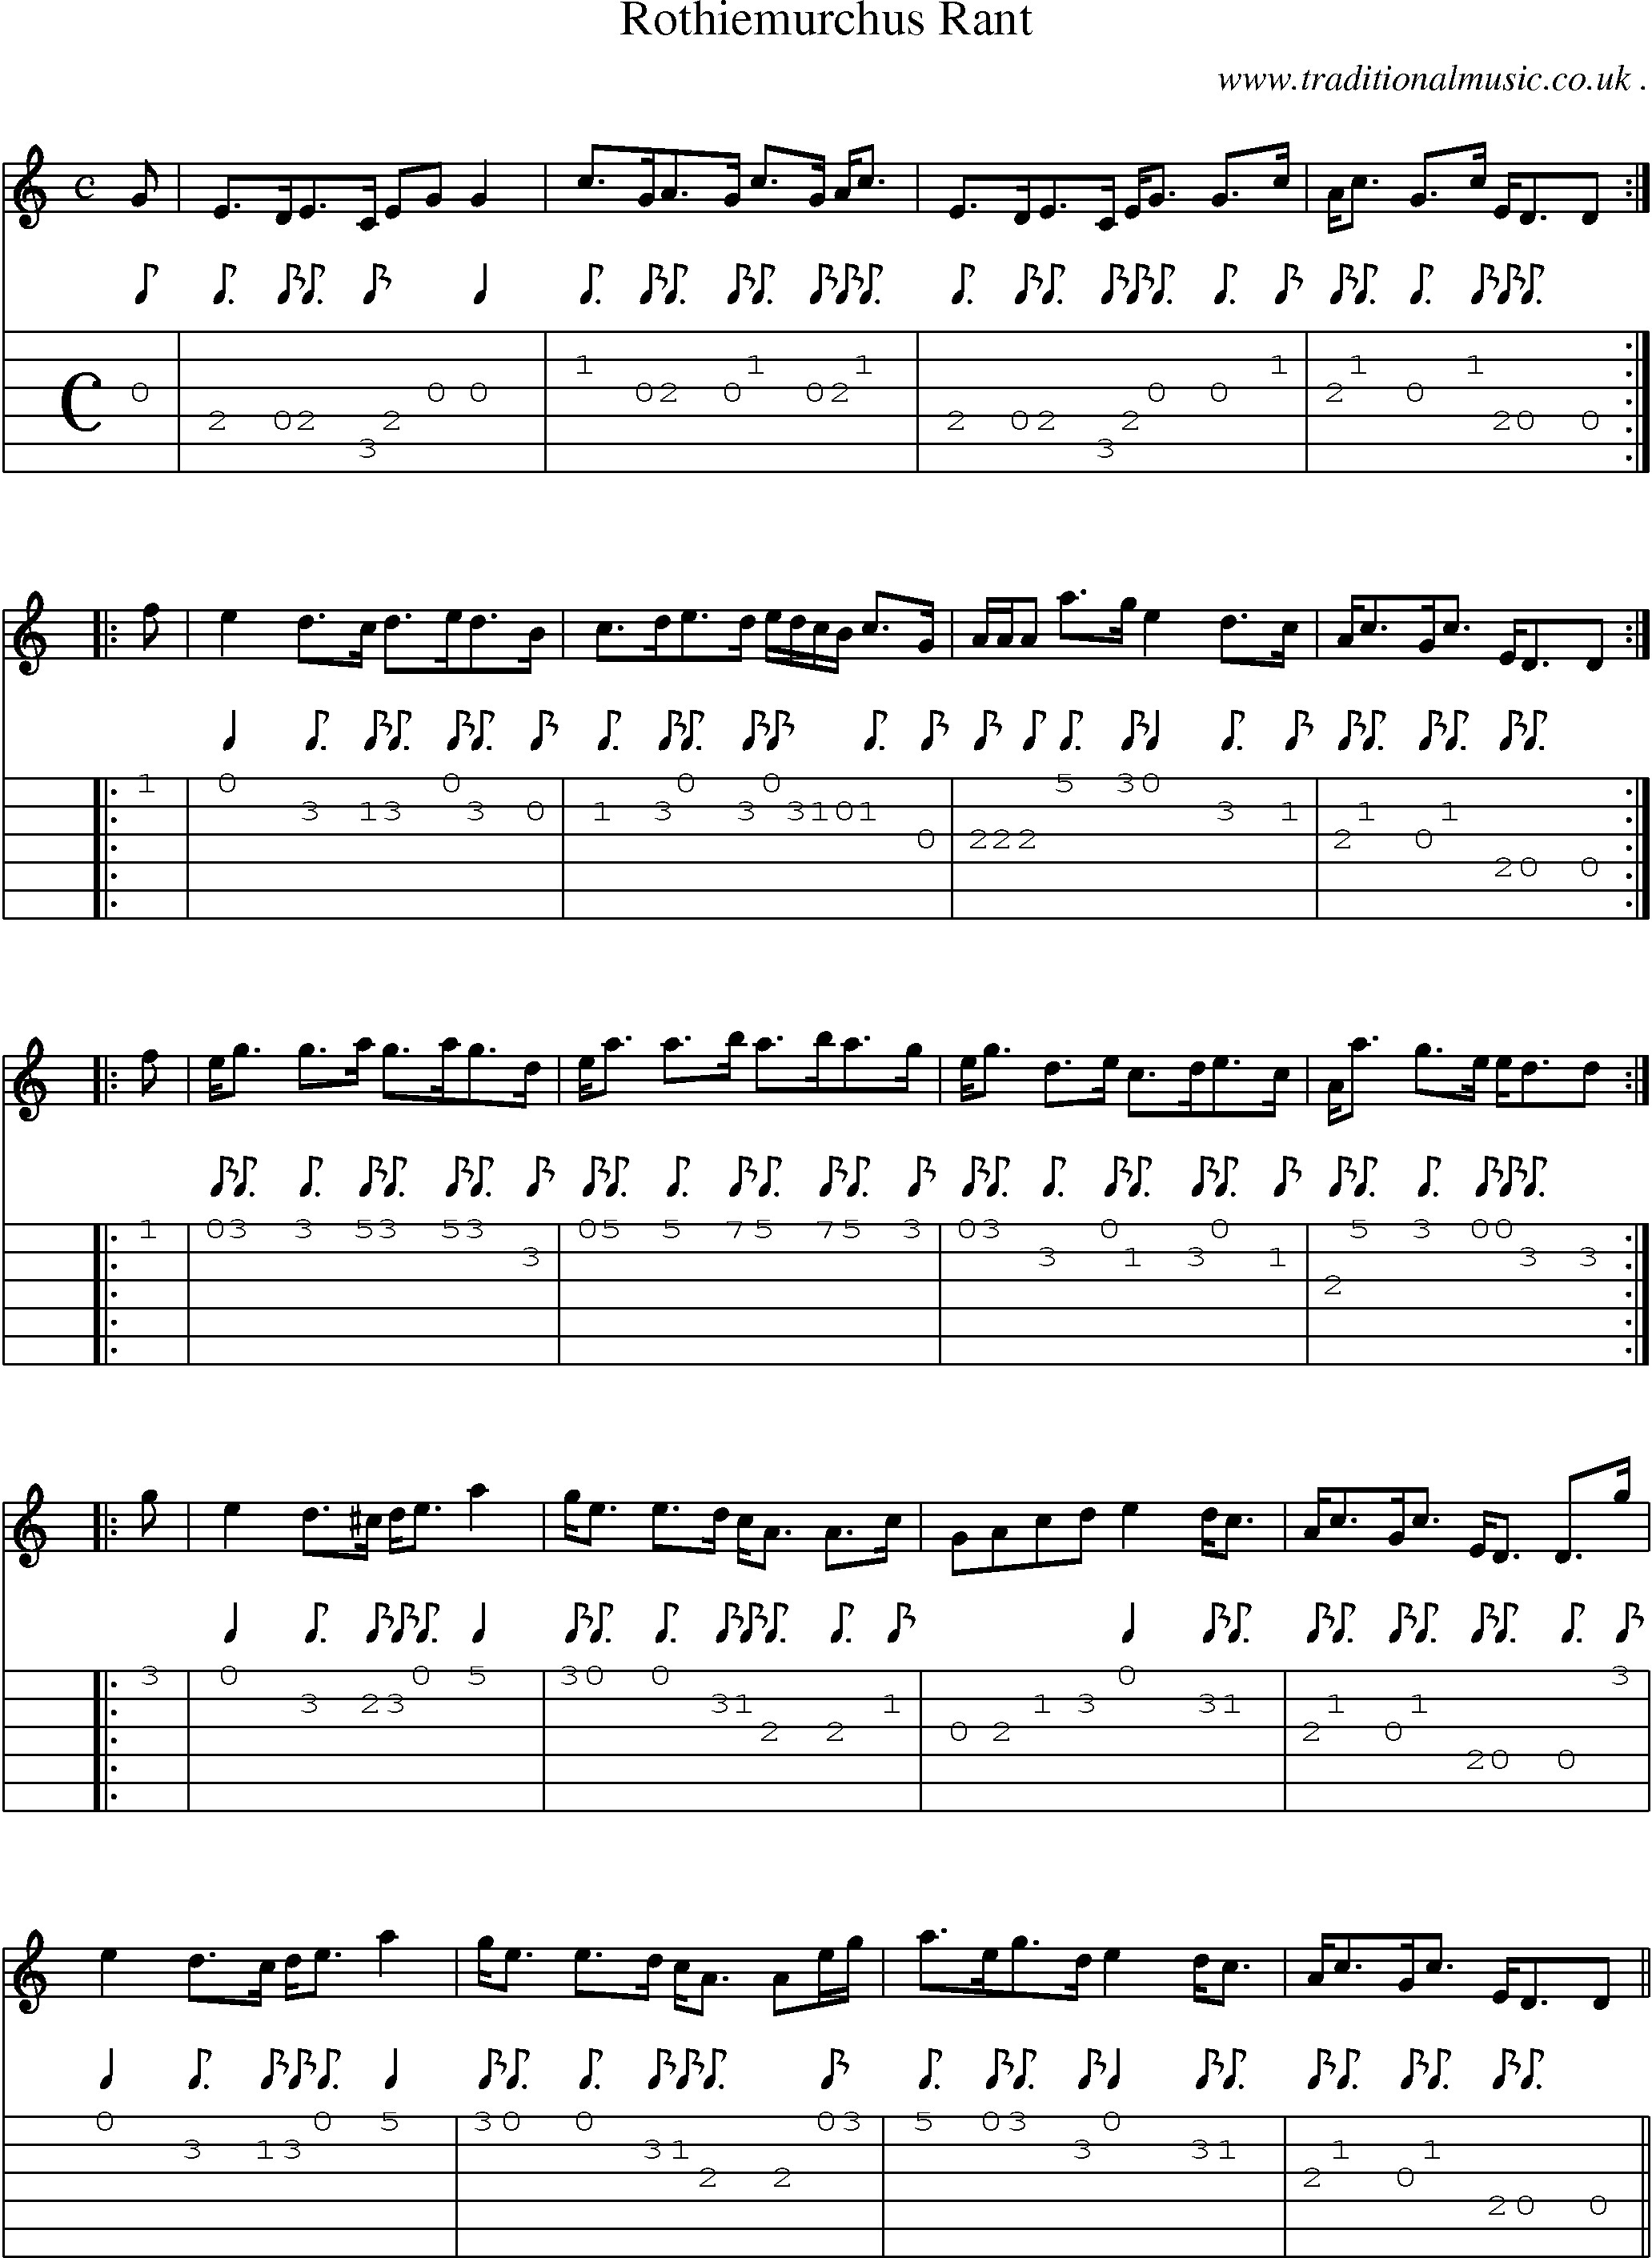 Sheet-music  score, Chords and Guitar Tabs for Rothiemurchus Rant